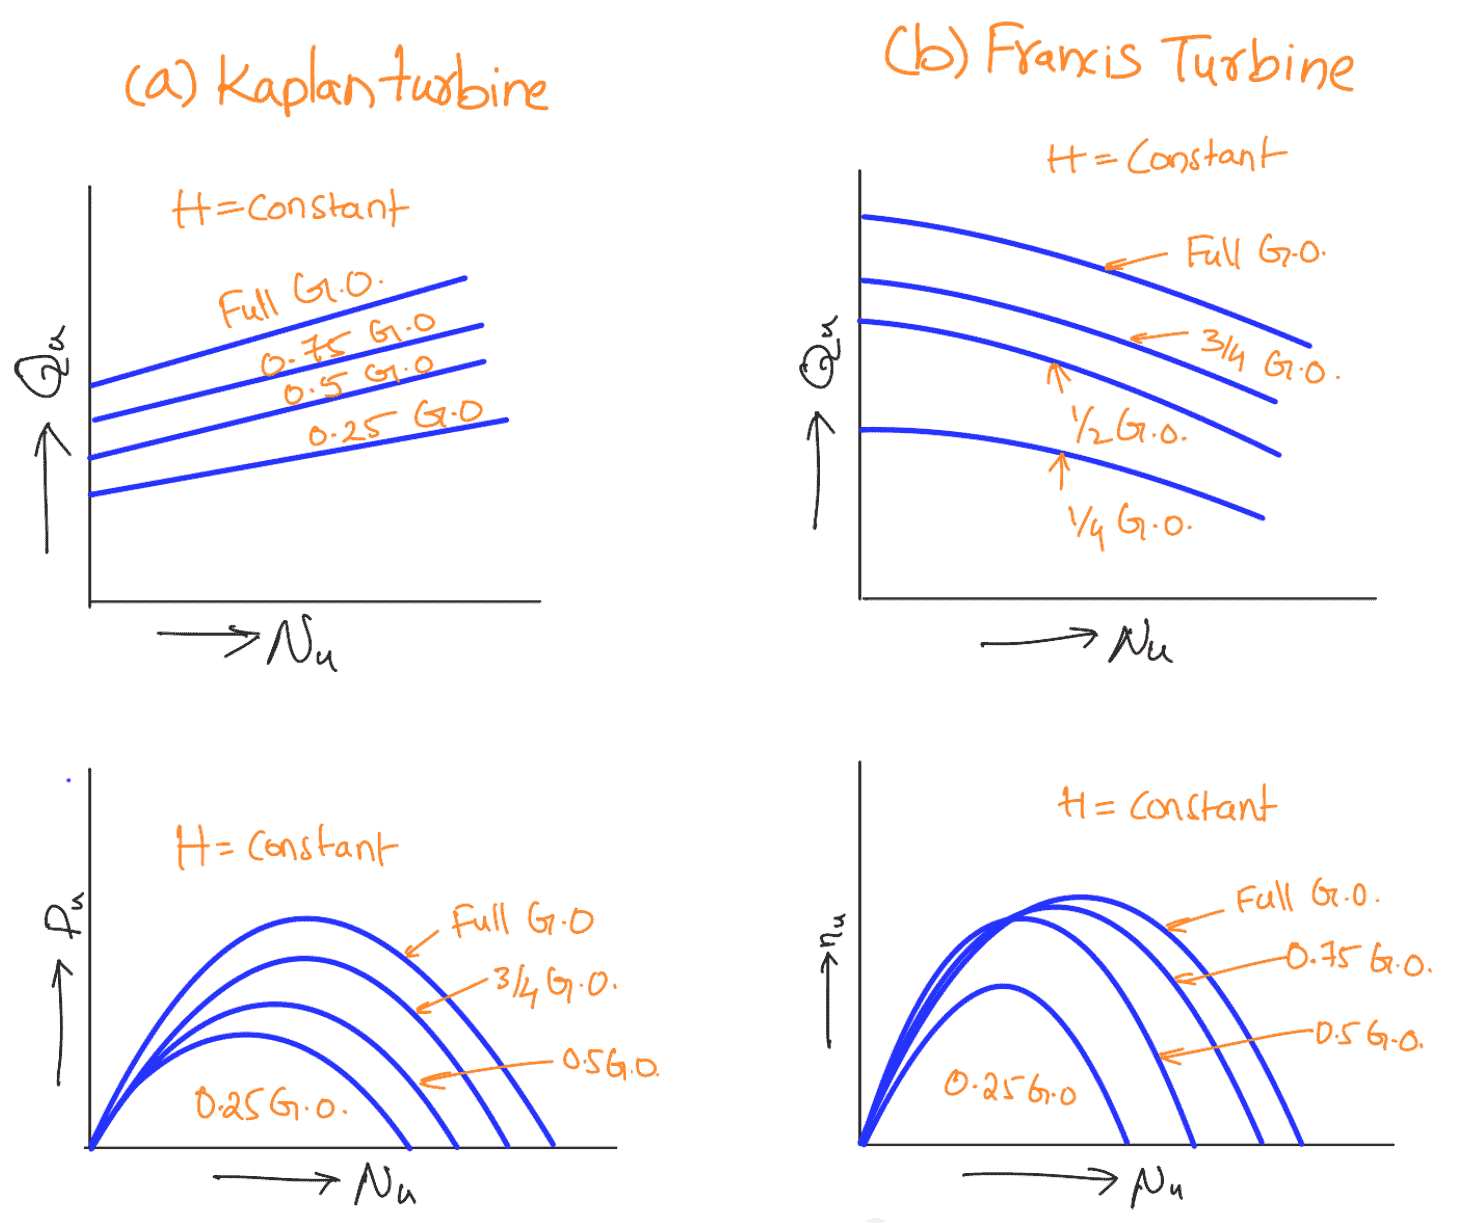 characteristic curves for reaction (Francis and Kaplan) turbines